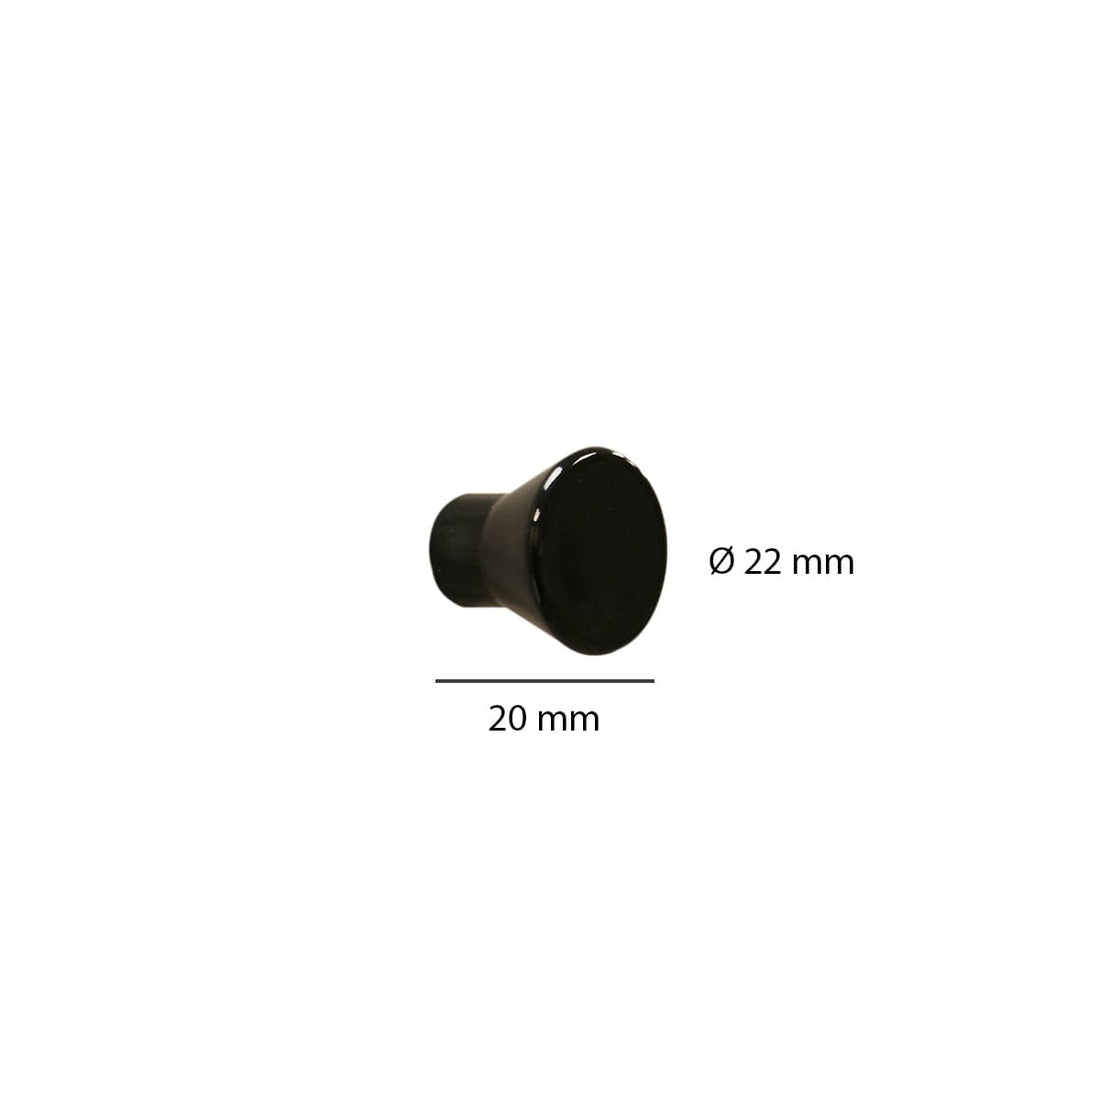 2 D 22 MM KNOBS IN BLACK RECYCLED PLASTIC